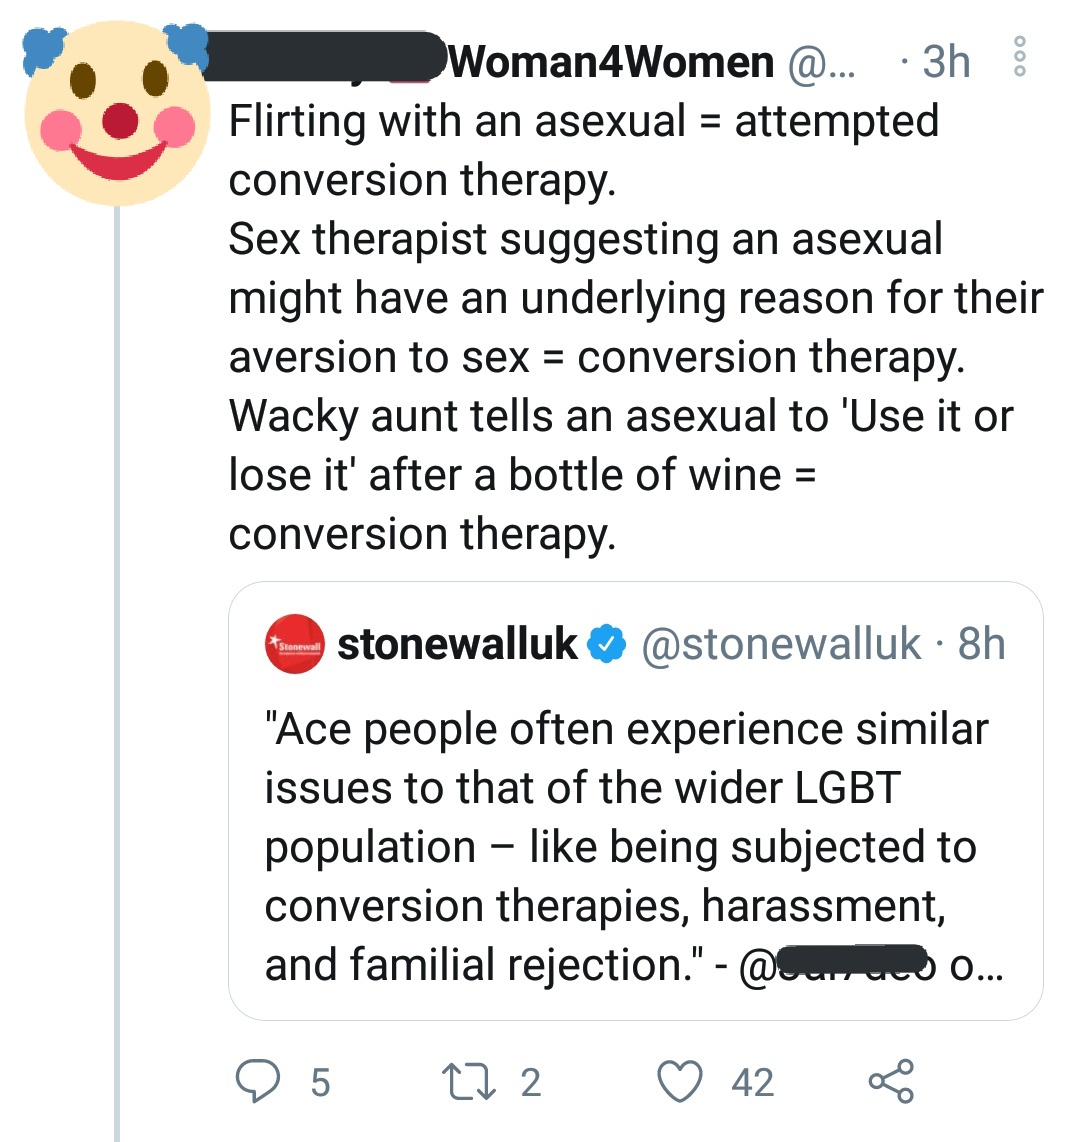 Anti-ace trolls are experts at minimizing issues. This may come as a surprise, but we actually do know what conversion therapy is. It's the terfs who seem confused KW: "aphobic and proud" "not lgbt" "just wanna be oppressed" "by definition"